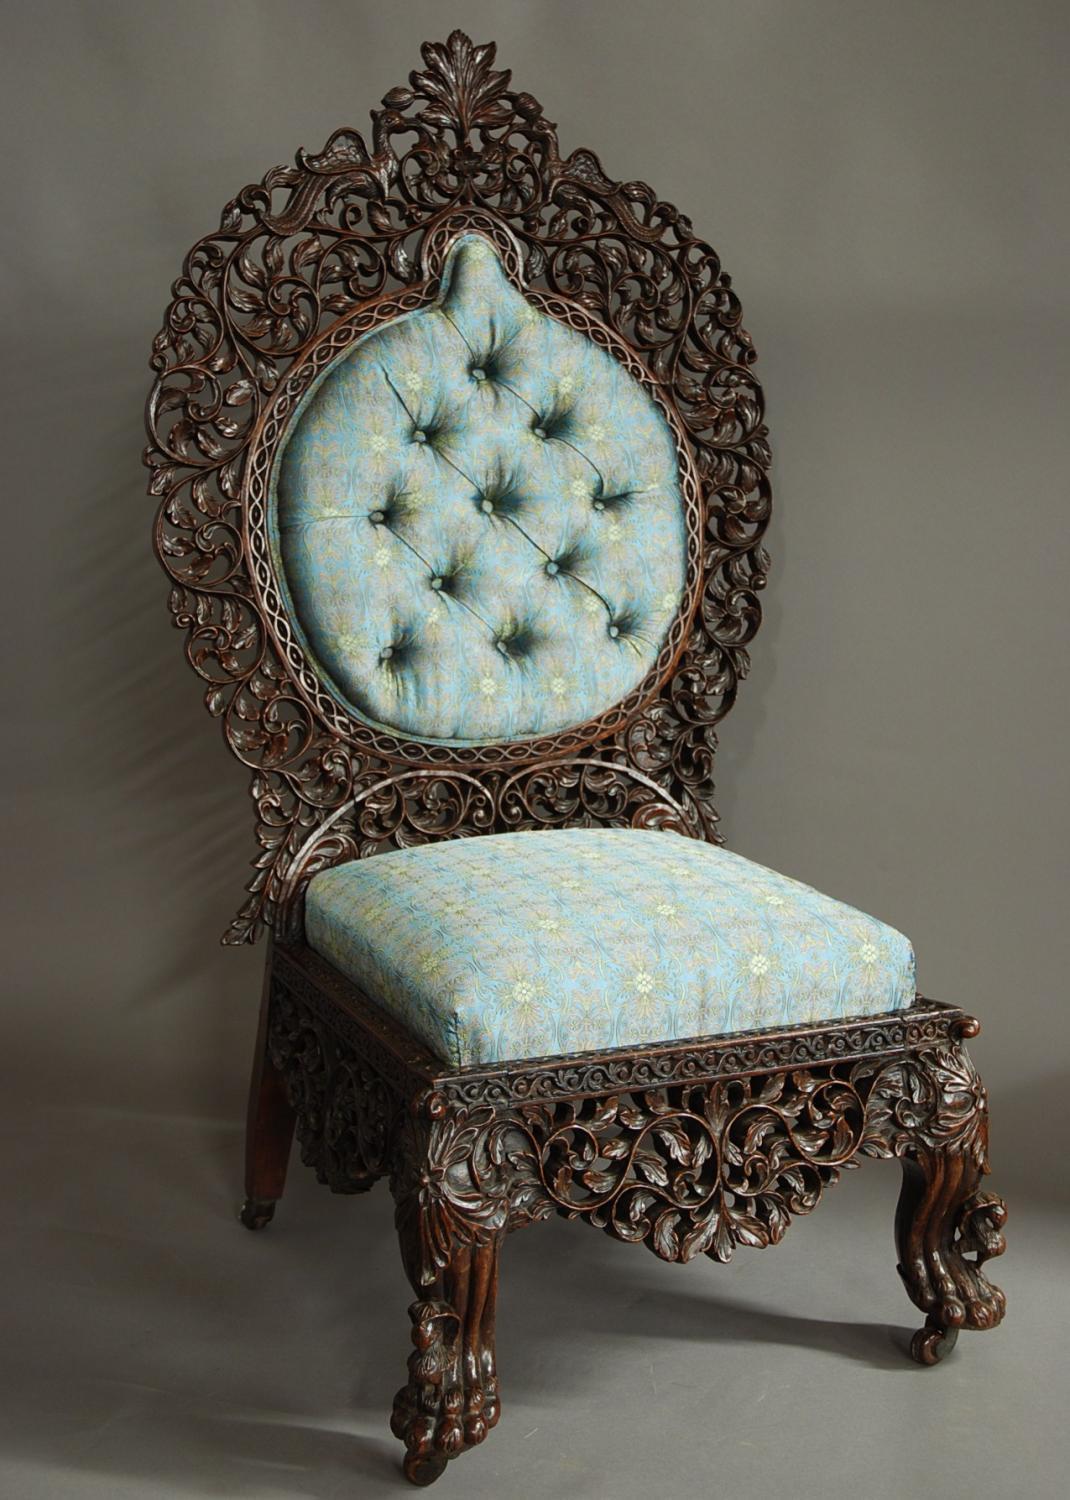 Superb quality Anglo Indian rosewood chair